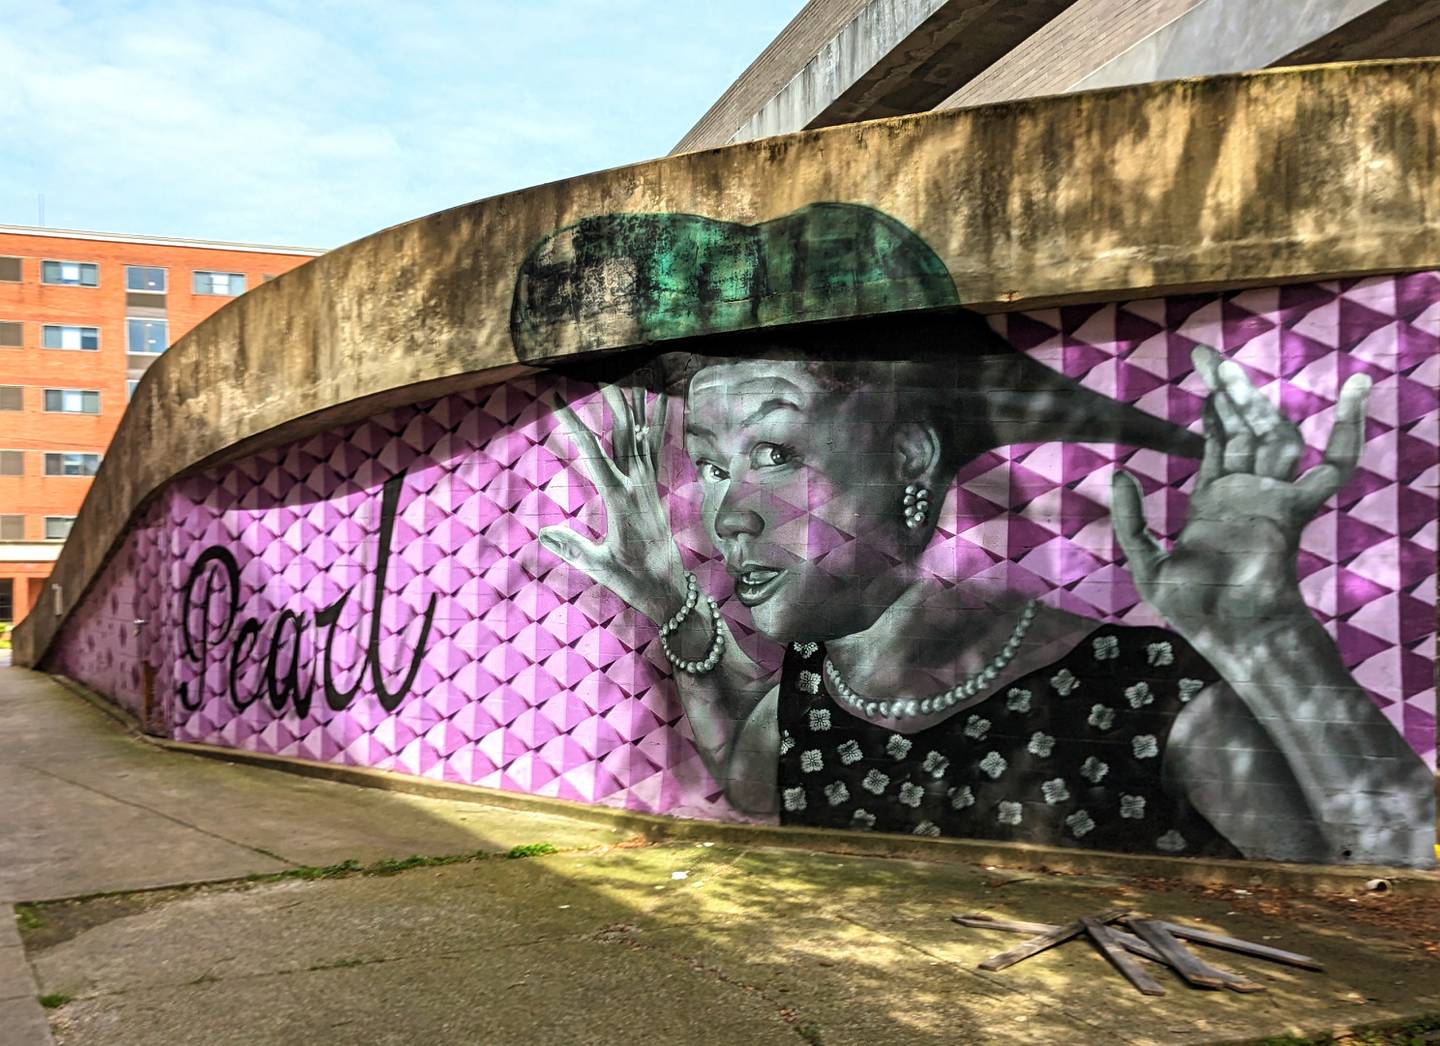 Twentieth-century entertainer Pearl Bailey appeared in Annapolis during the hey-day of the city's once segregated Black neighborhood, The Old Fourth Ward. The mural marks the spot where the neighborhood once stood.